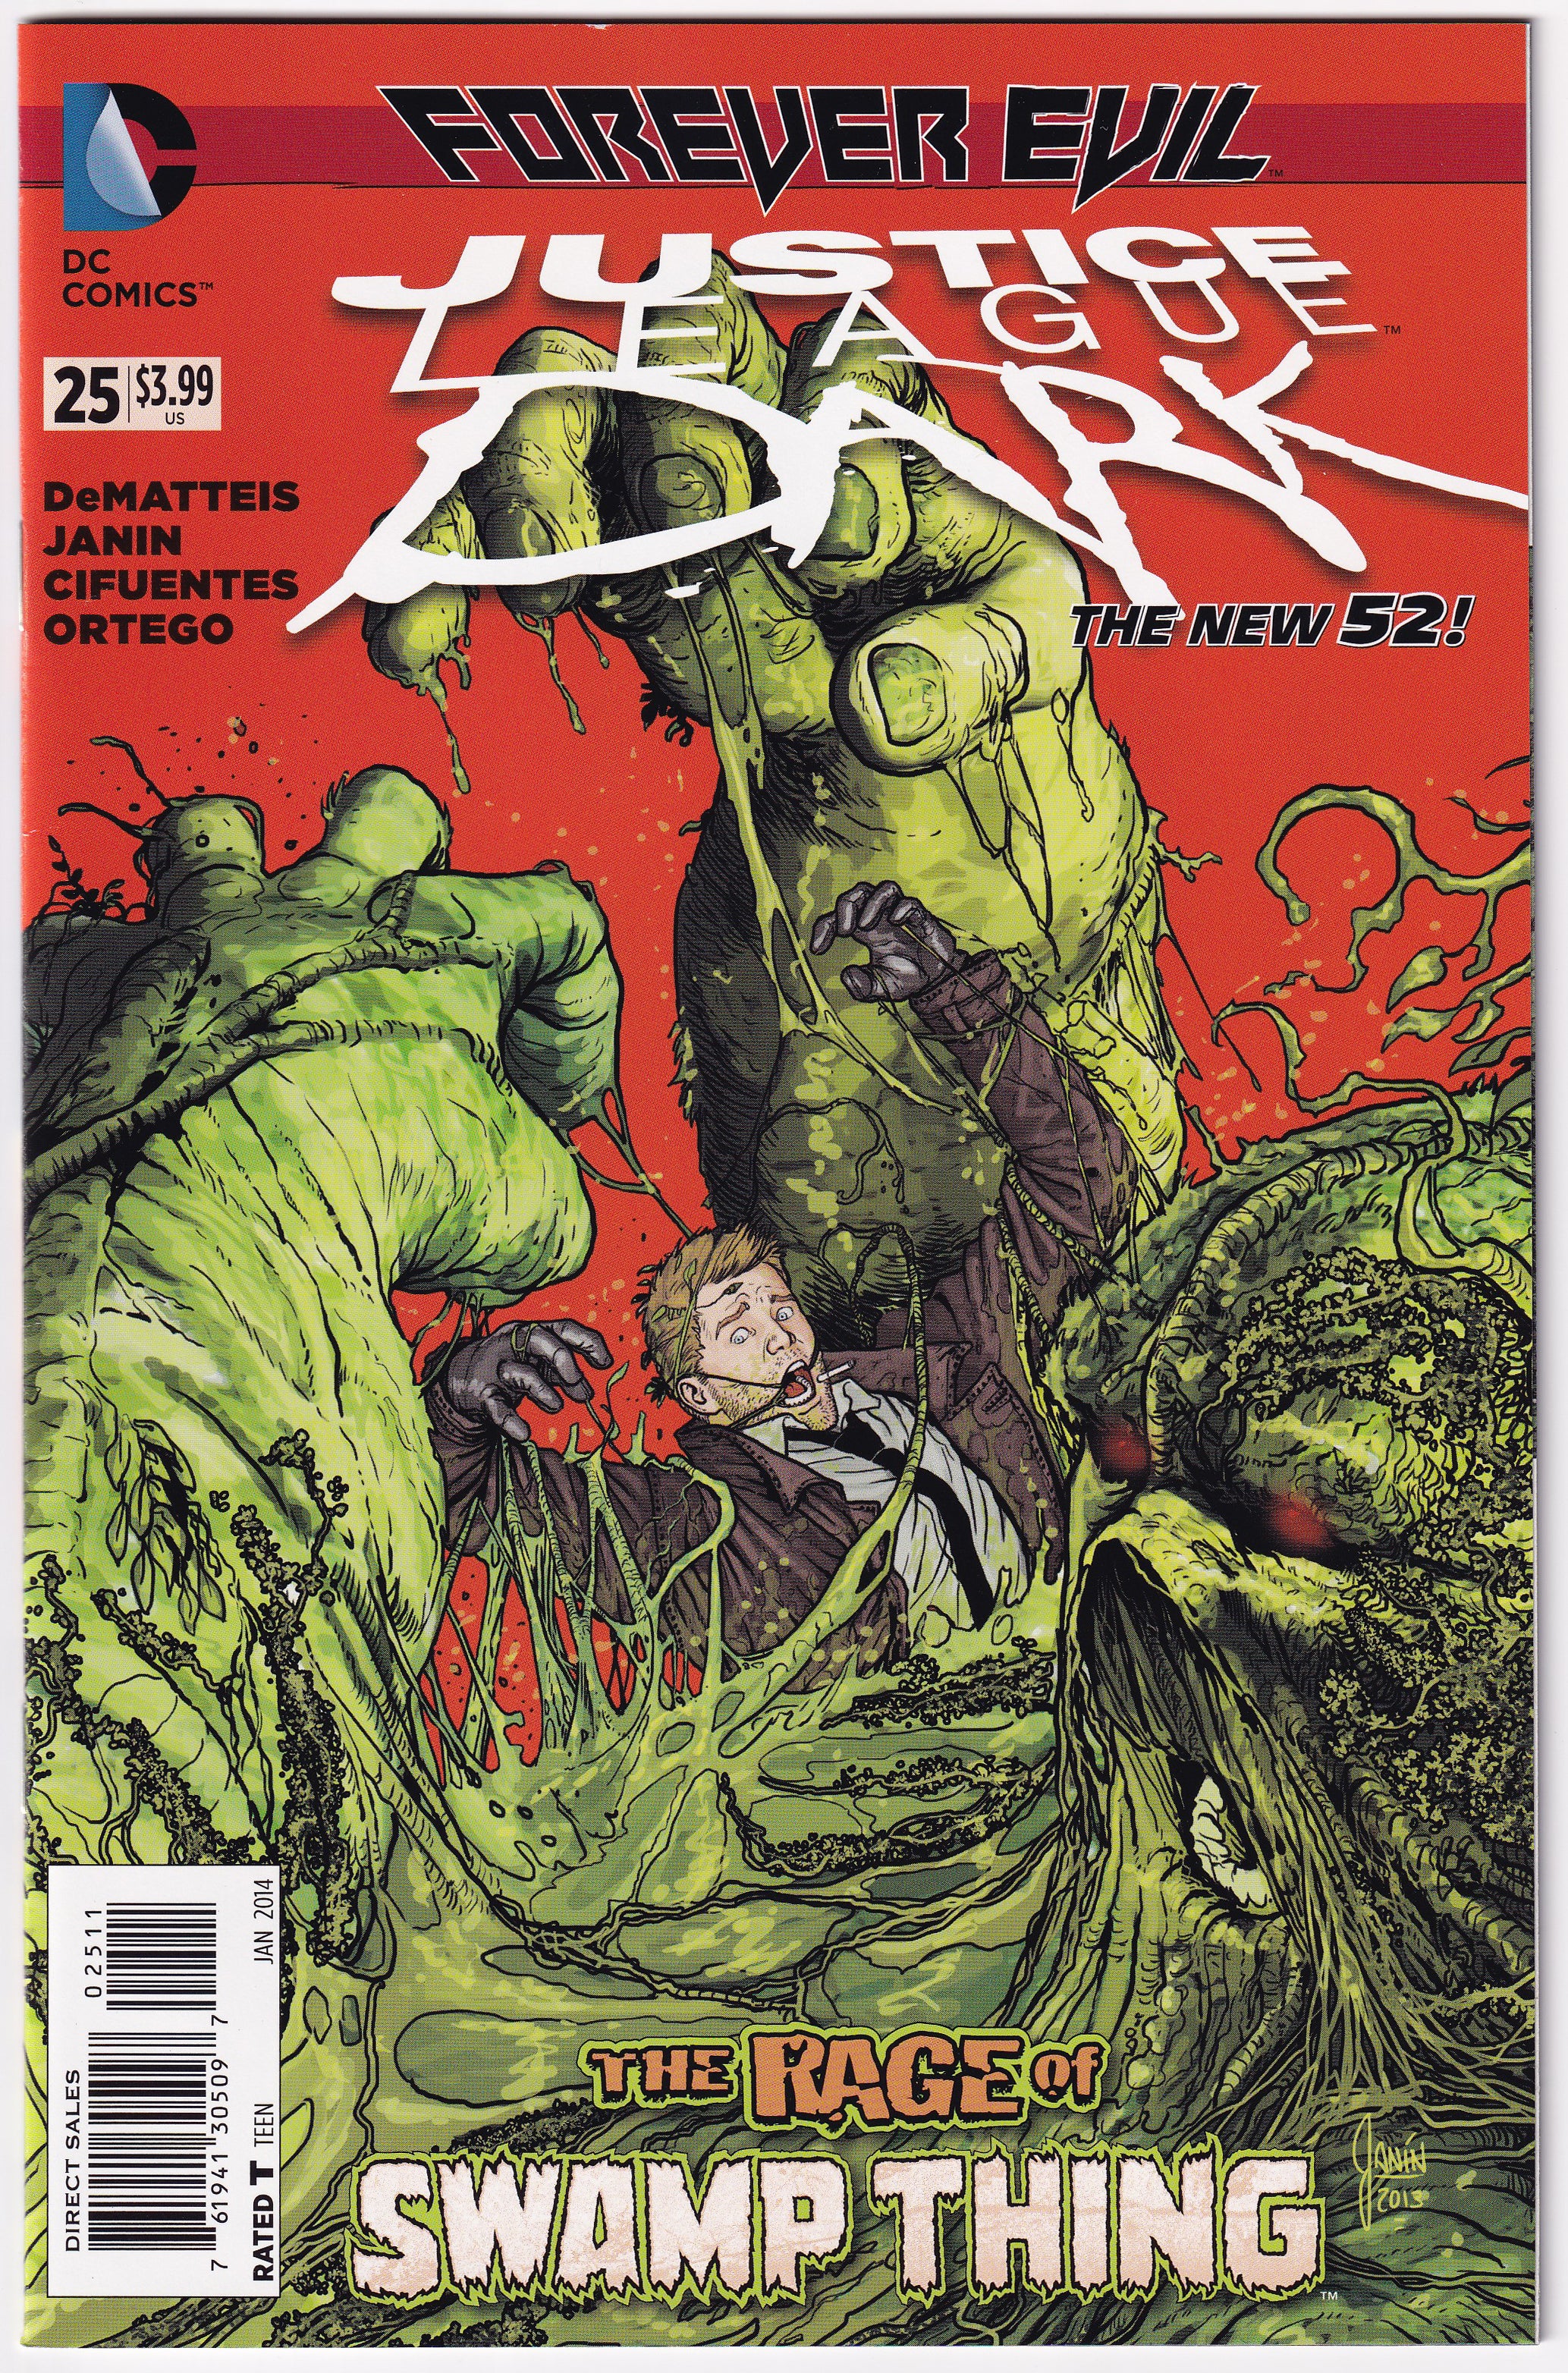 Photo of Justice League Dark Vol. 1 (2013)  Issue 25A  Near Mint Comic sold by Stronghold Collectibles